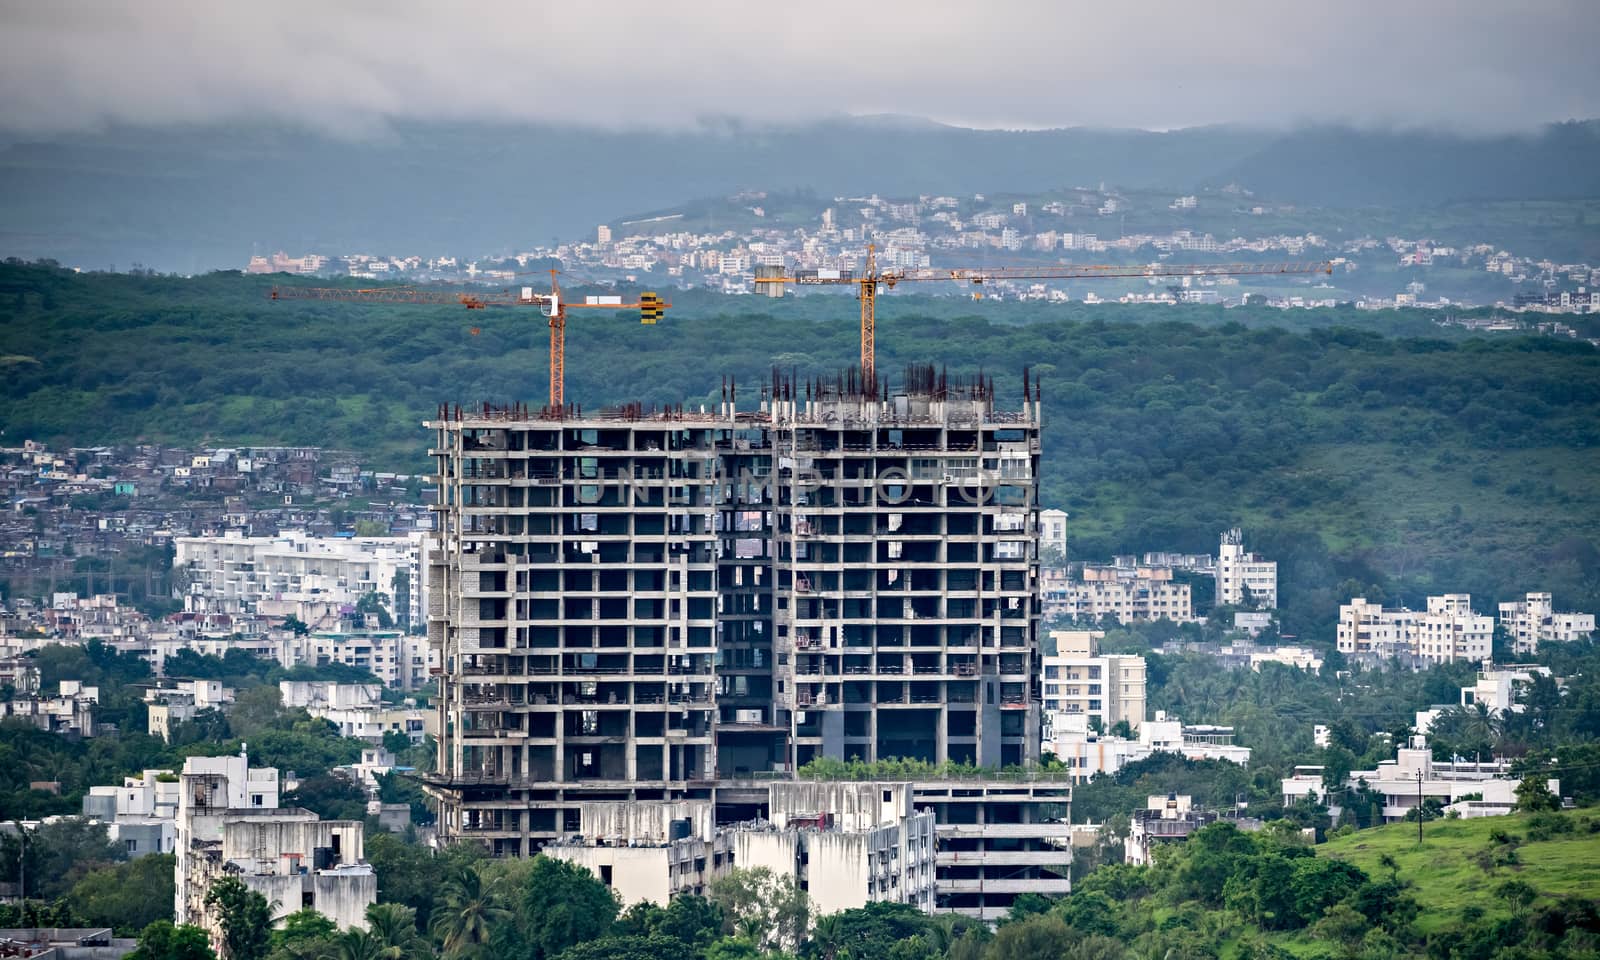 Twin, tall buildings under construction in Pune, Maharashtra, India. New infrastructure under developement. by lalam